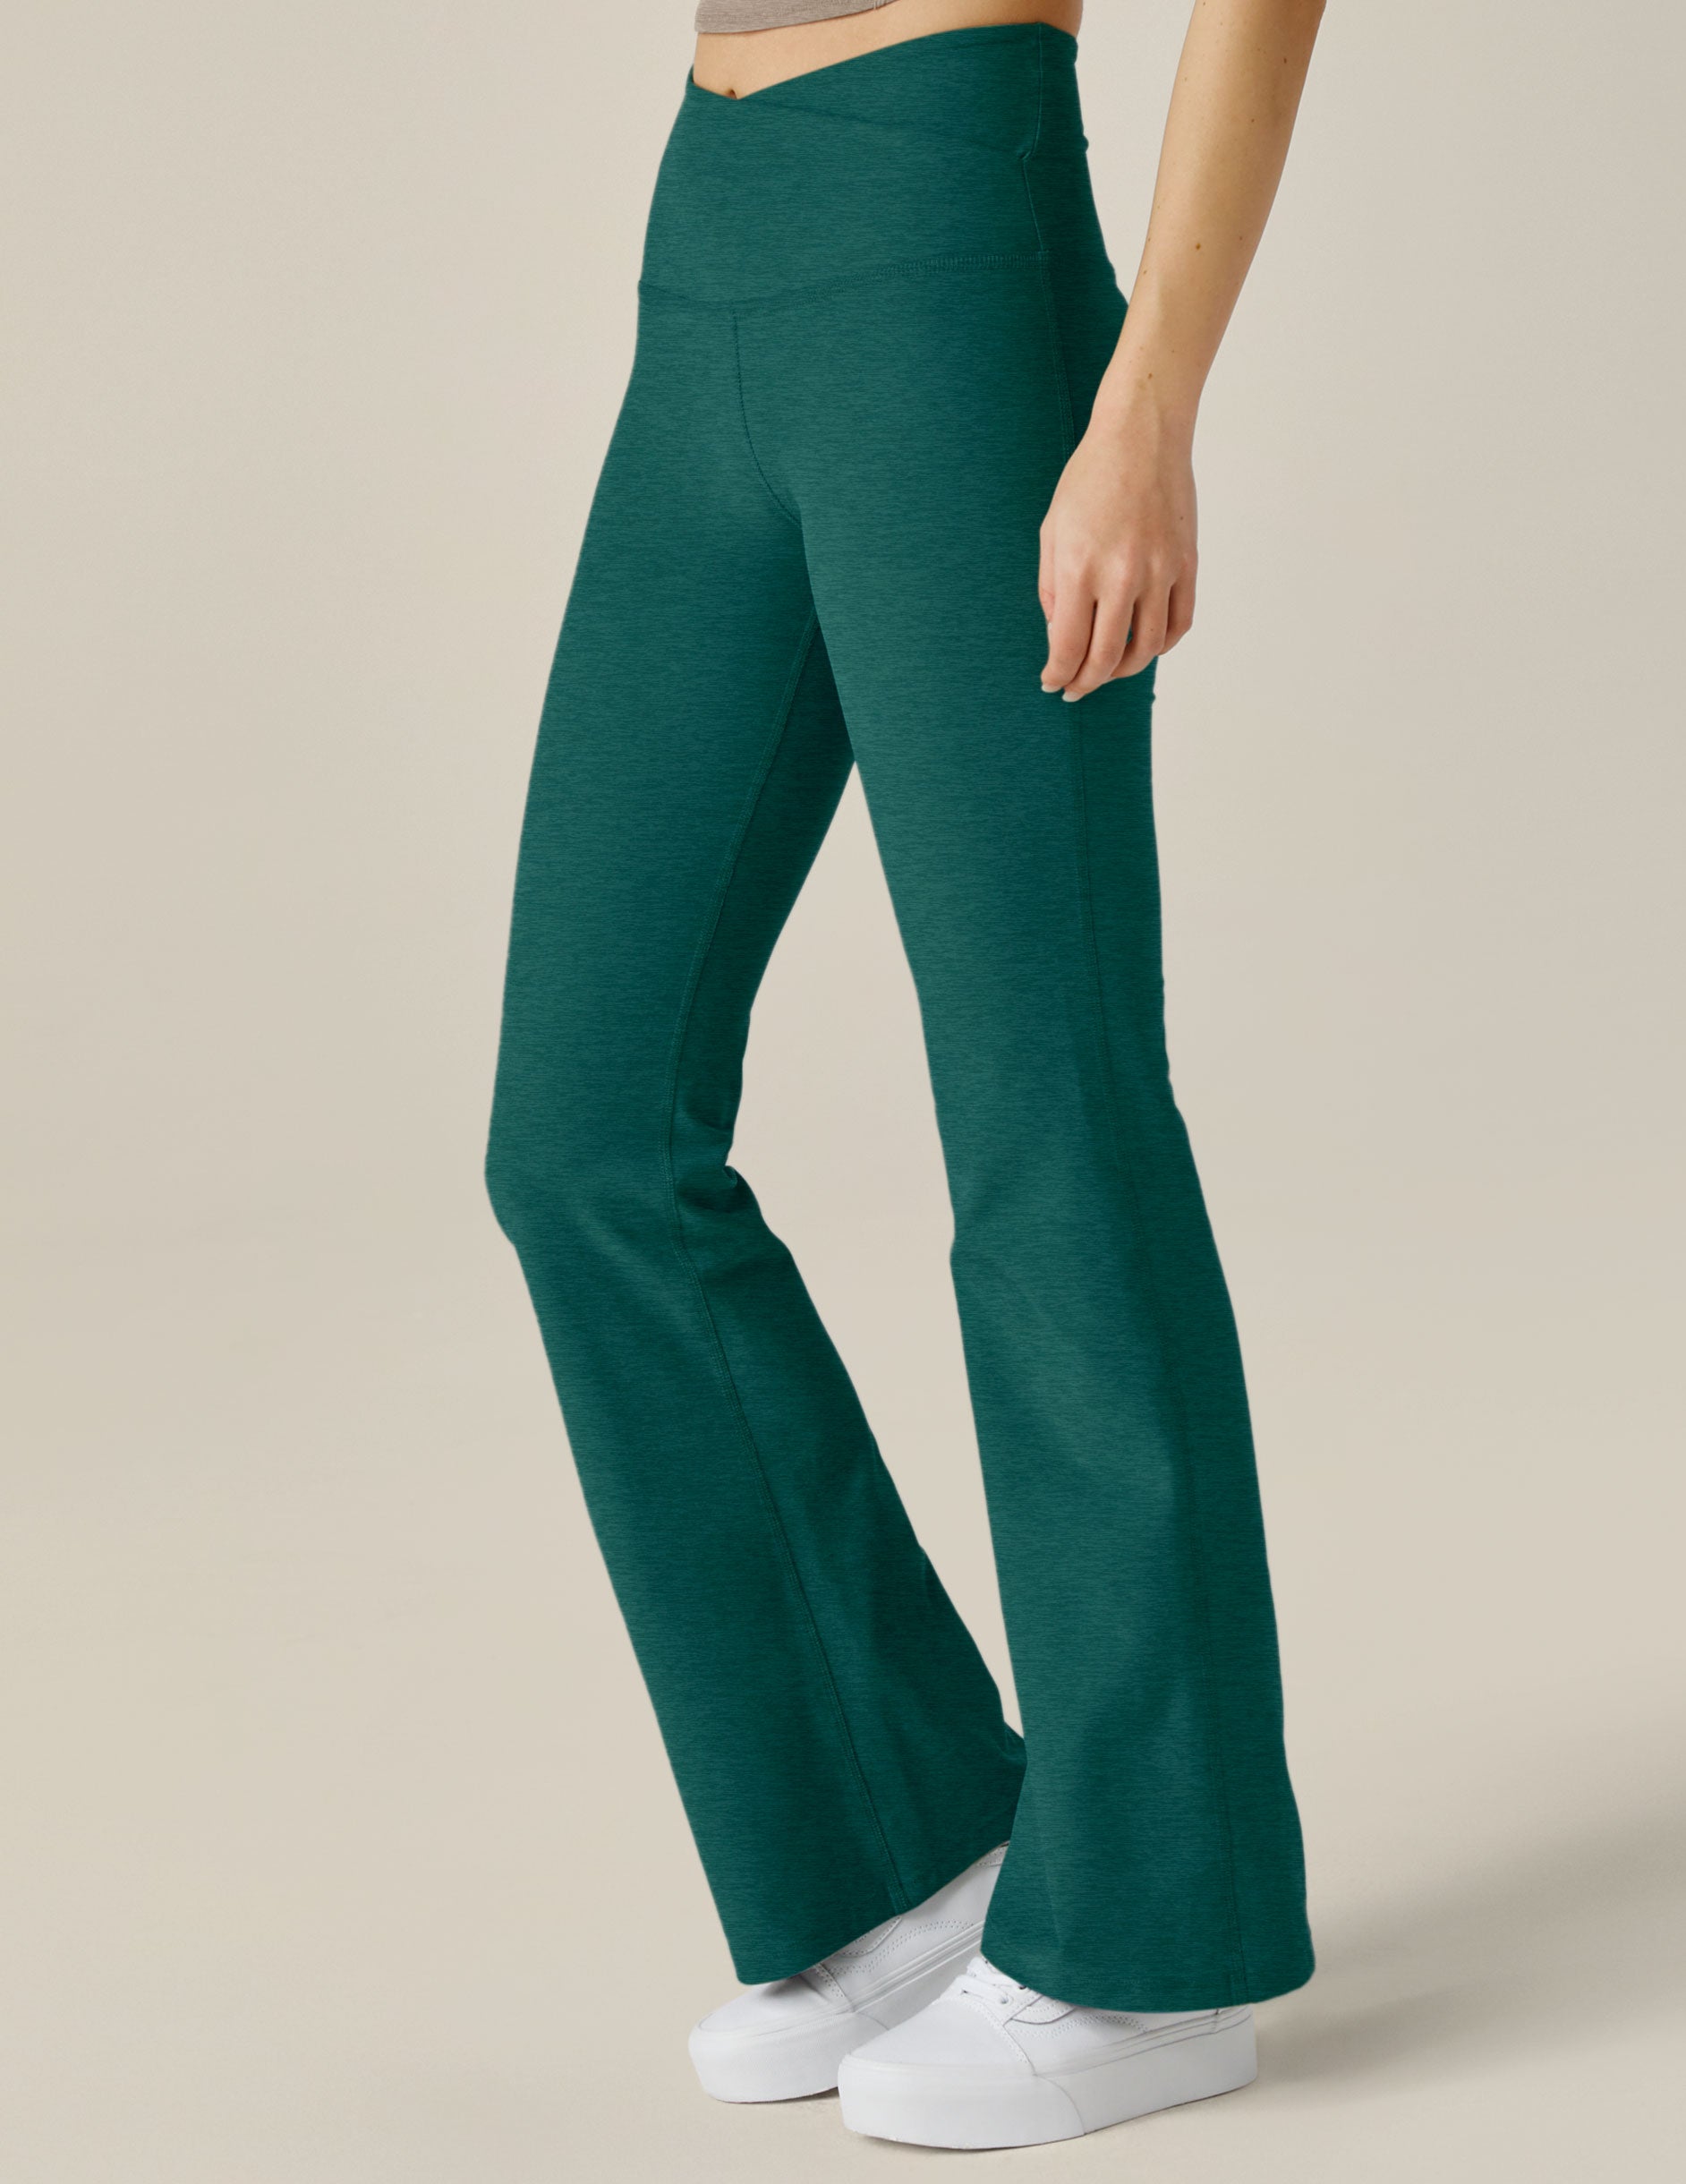 green bootcut legging with crossover design on waistband